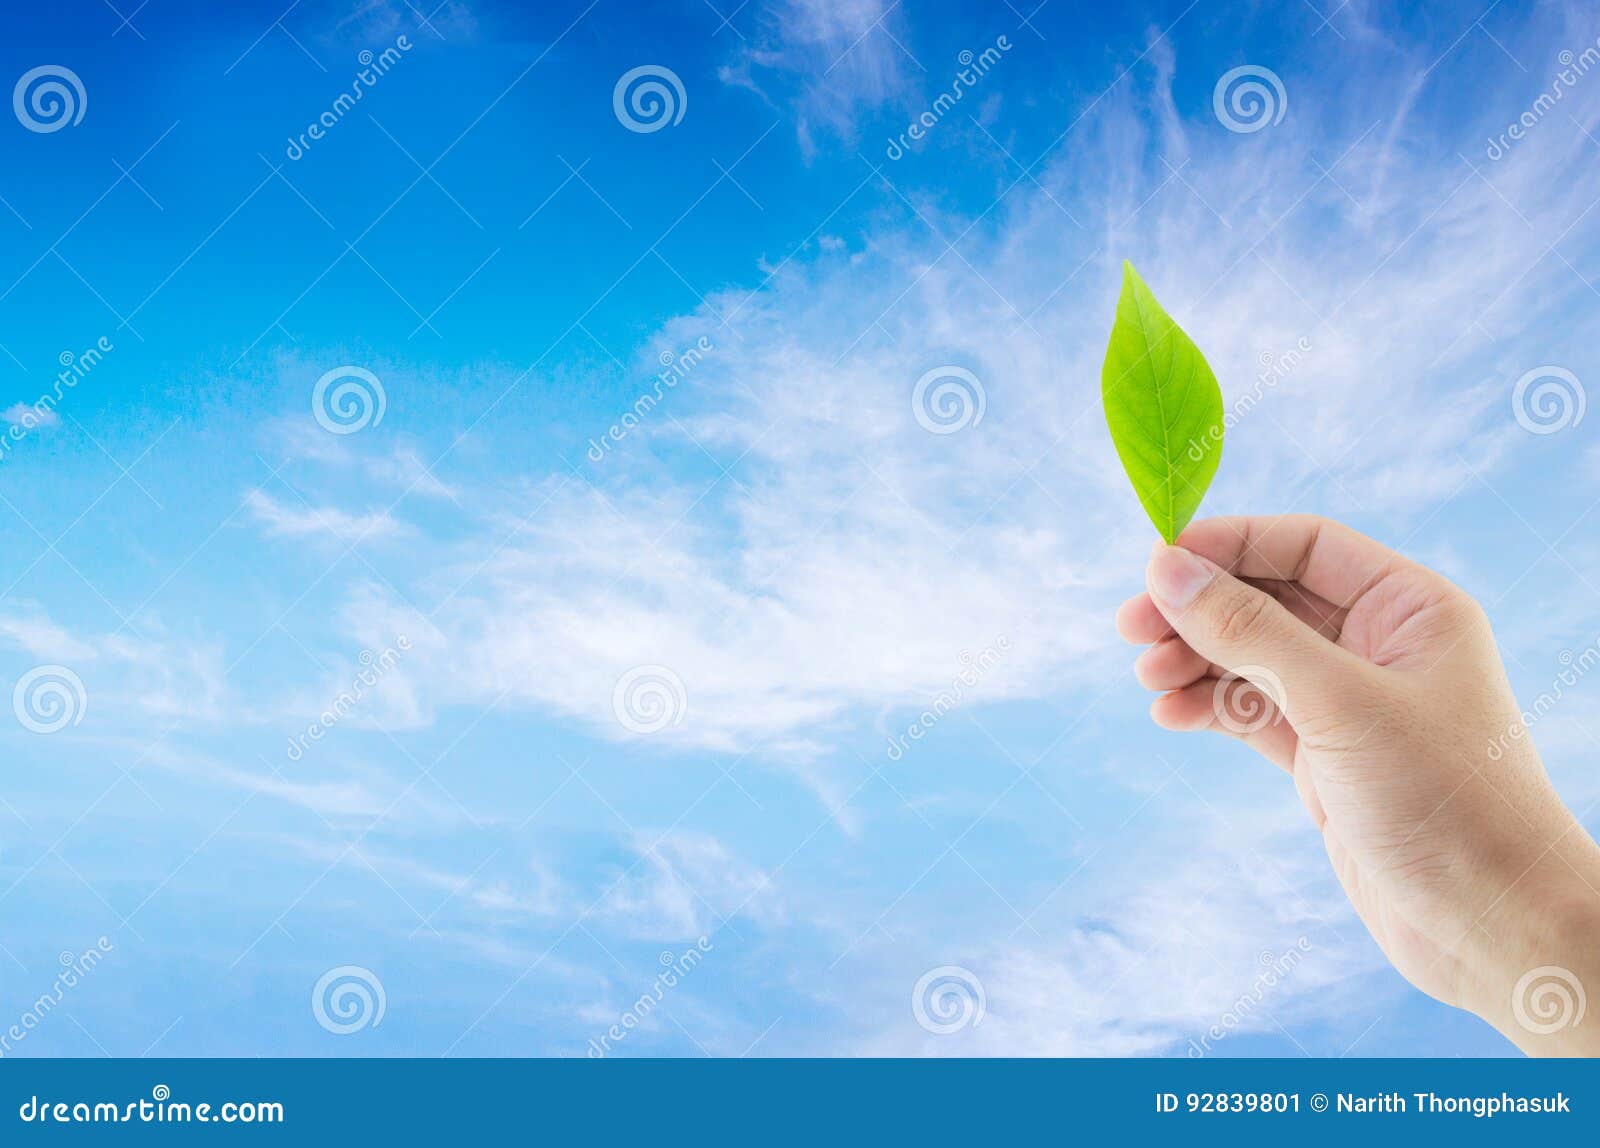 Hand Holding Green Leaf on Sky Background. Stock Image - Image of hand